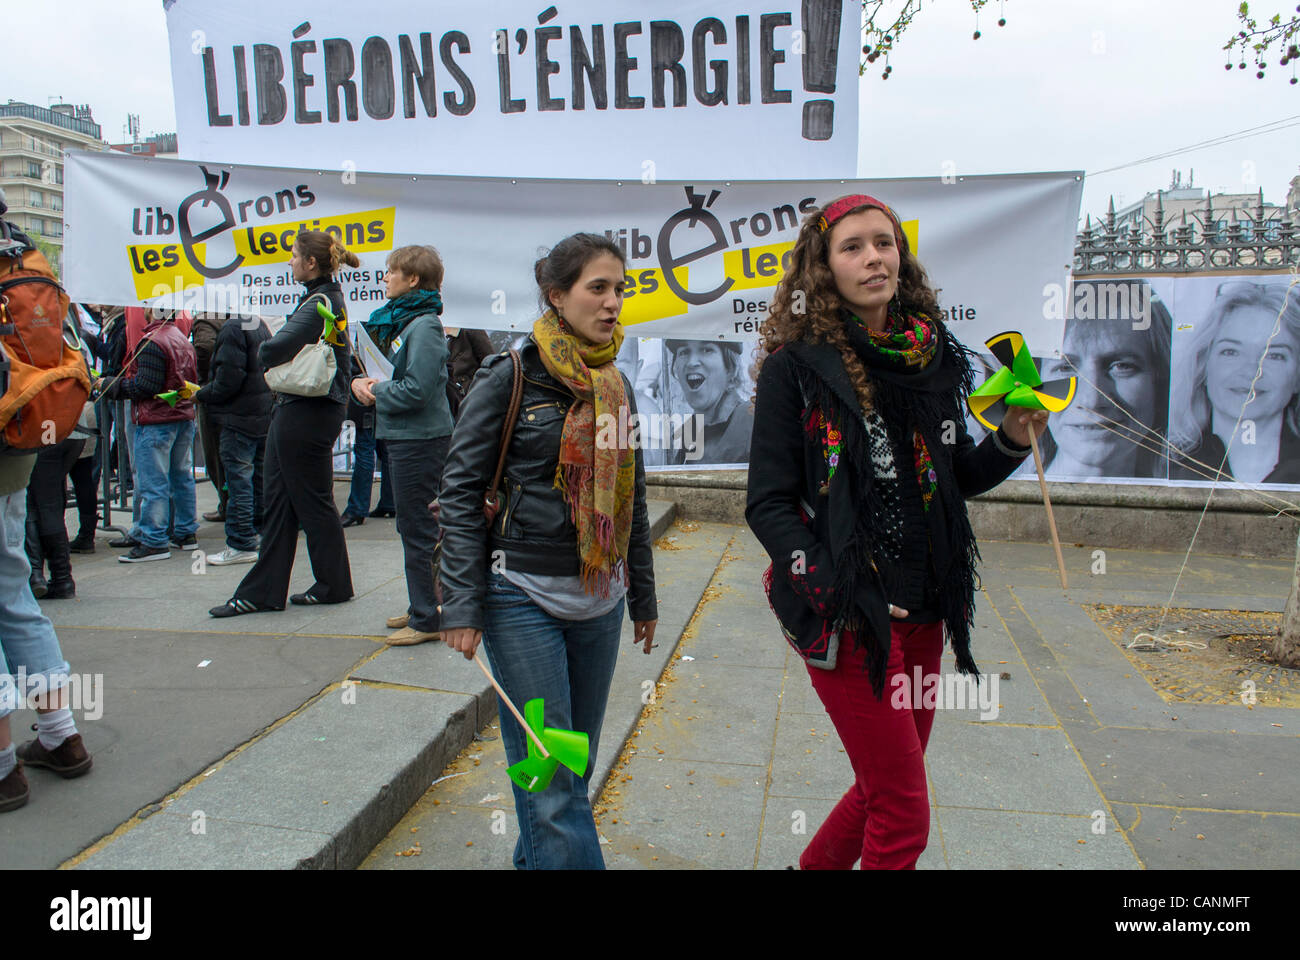 Paris, France, French Teenagers at Environment Awareness Public Event,  'Liberons les Elections' (Greenpeace), during French Presidential Elections, demonstrator female, women climate protest Stock Photo